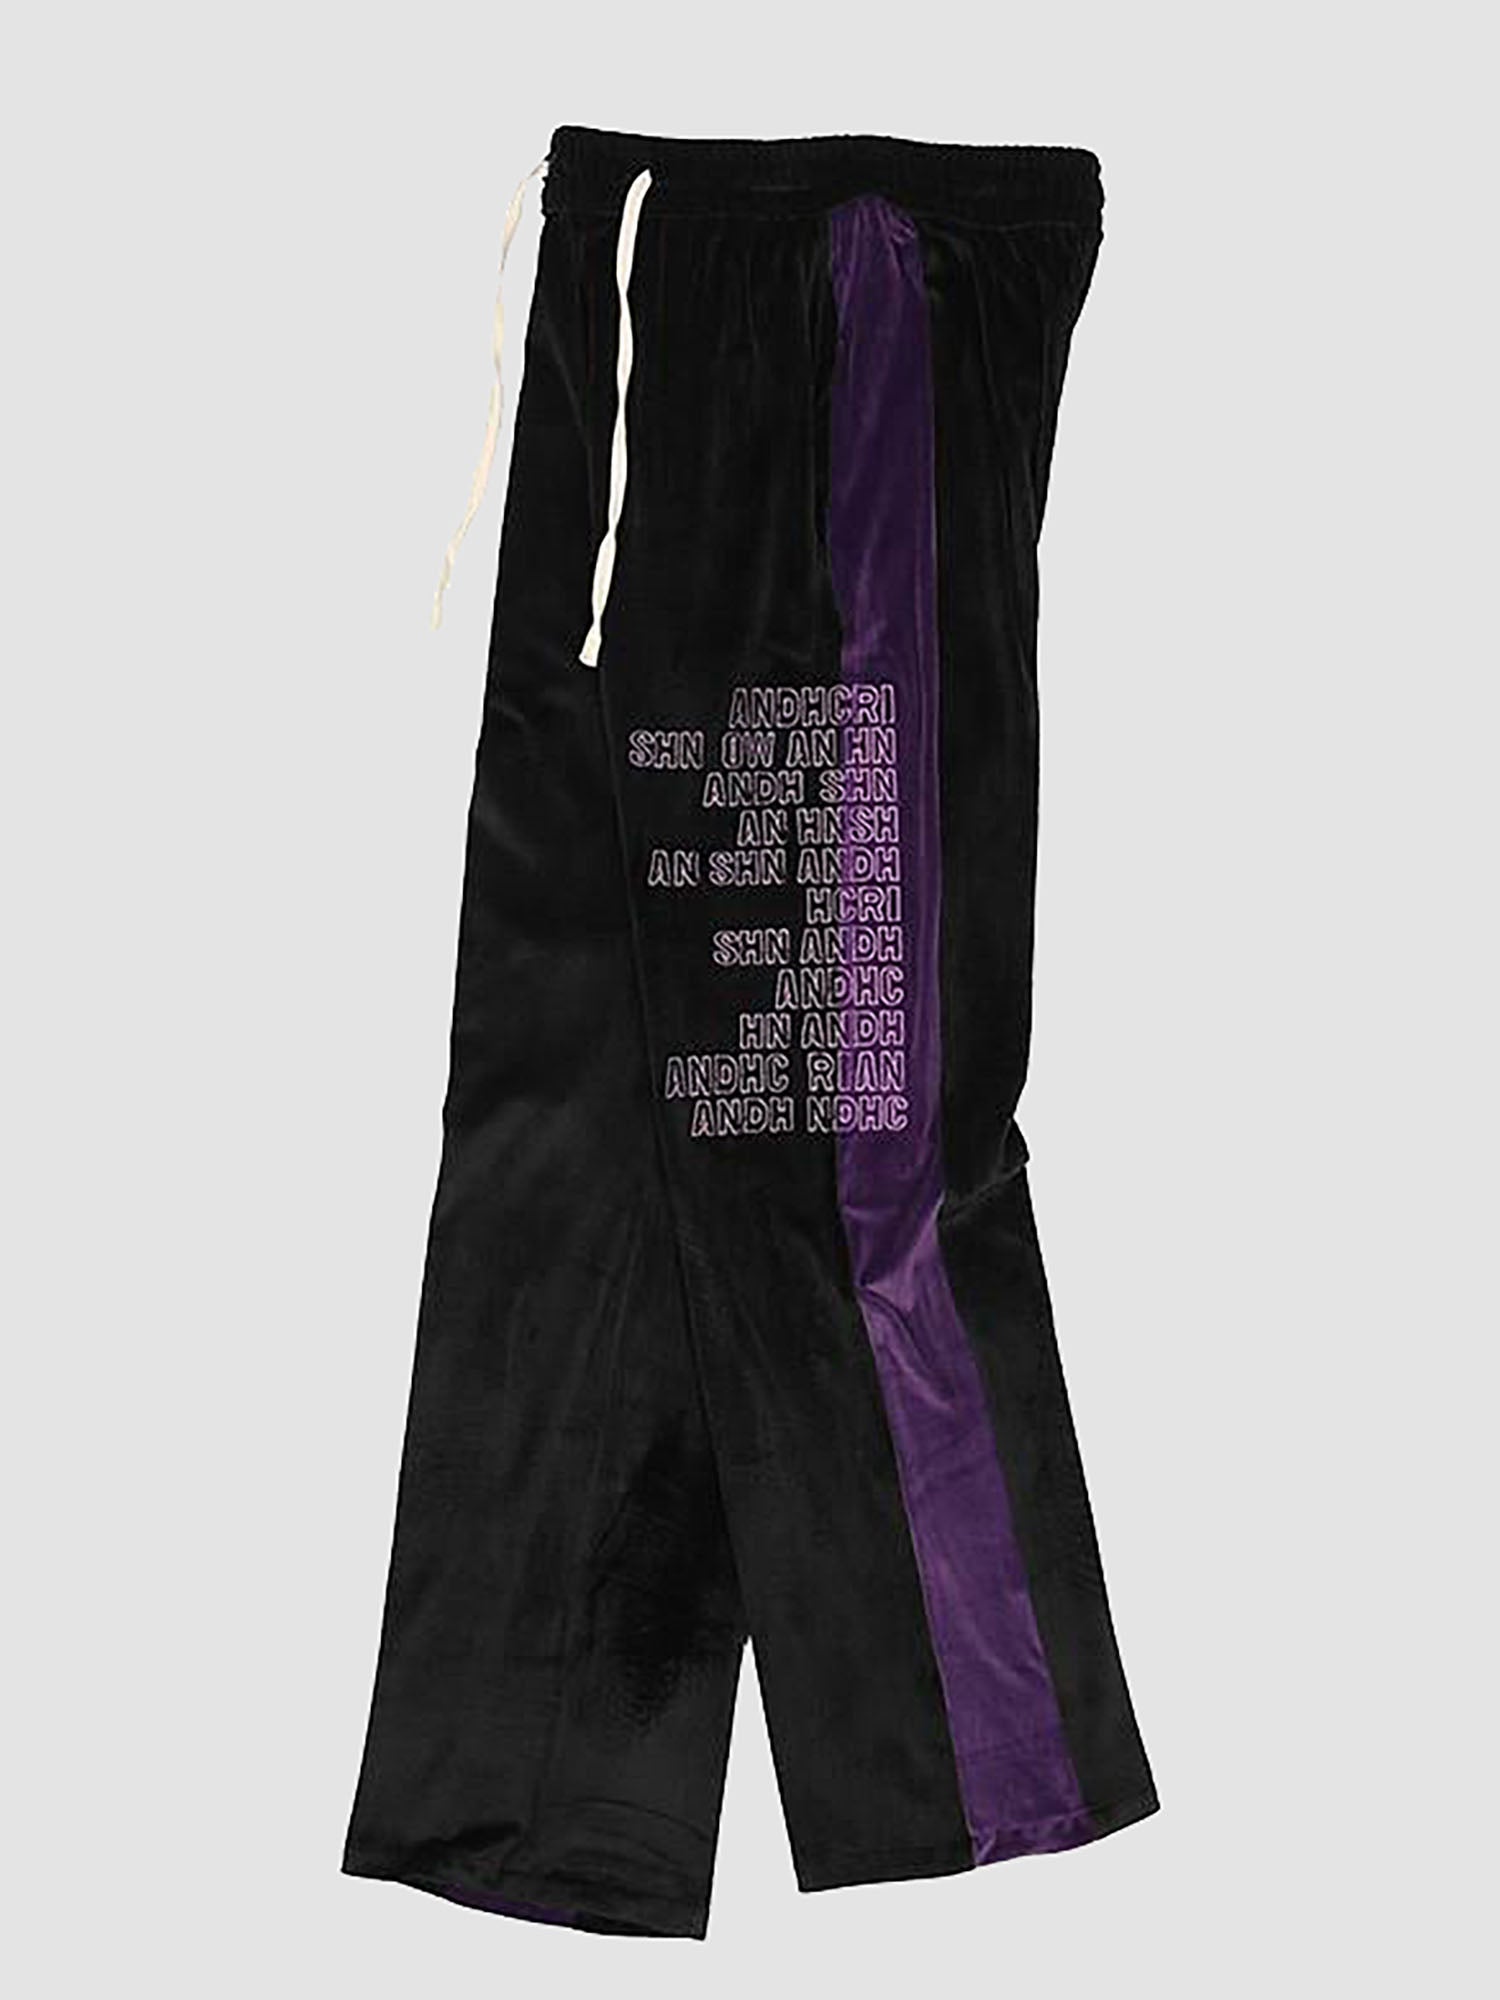 JUSTNOTAG Fashionable Embroidery Velvet Joggers